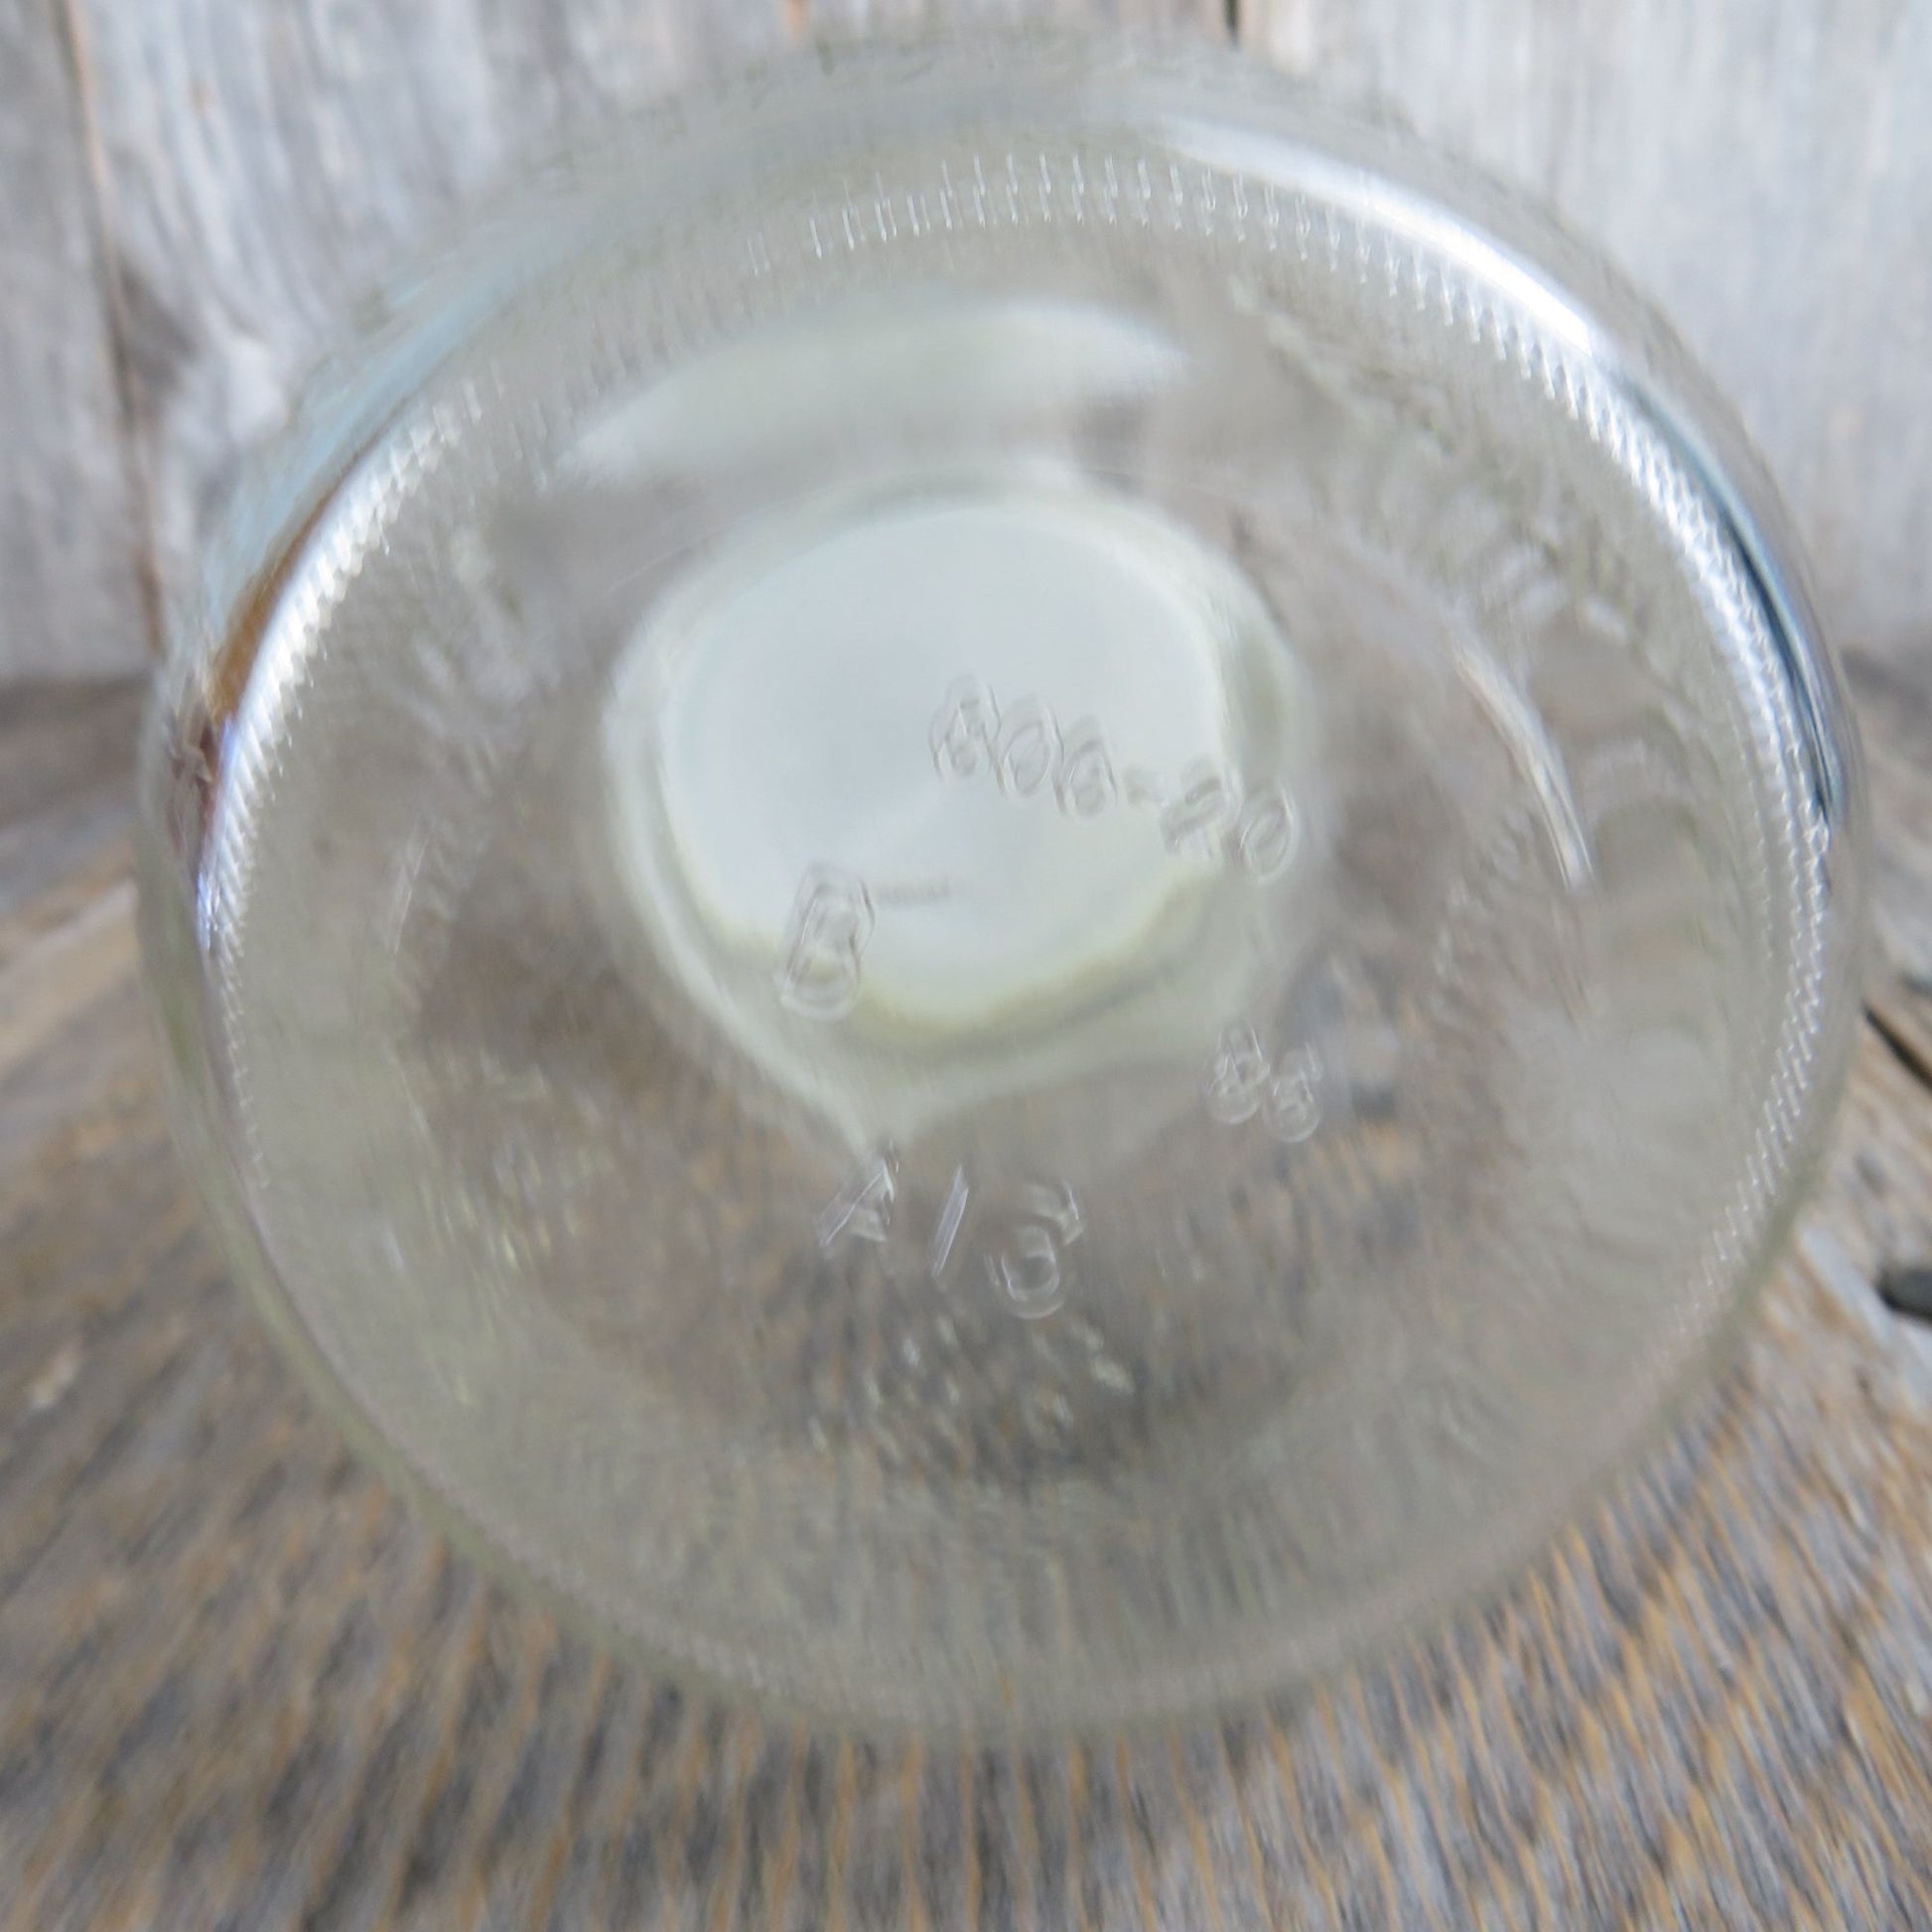 Hidden Valley Ranch Shaker Jar Salad Dressing Mixer Vintage Promotional  Glass Mix Container 